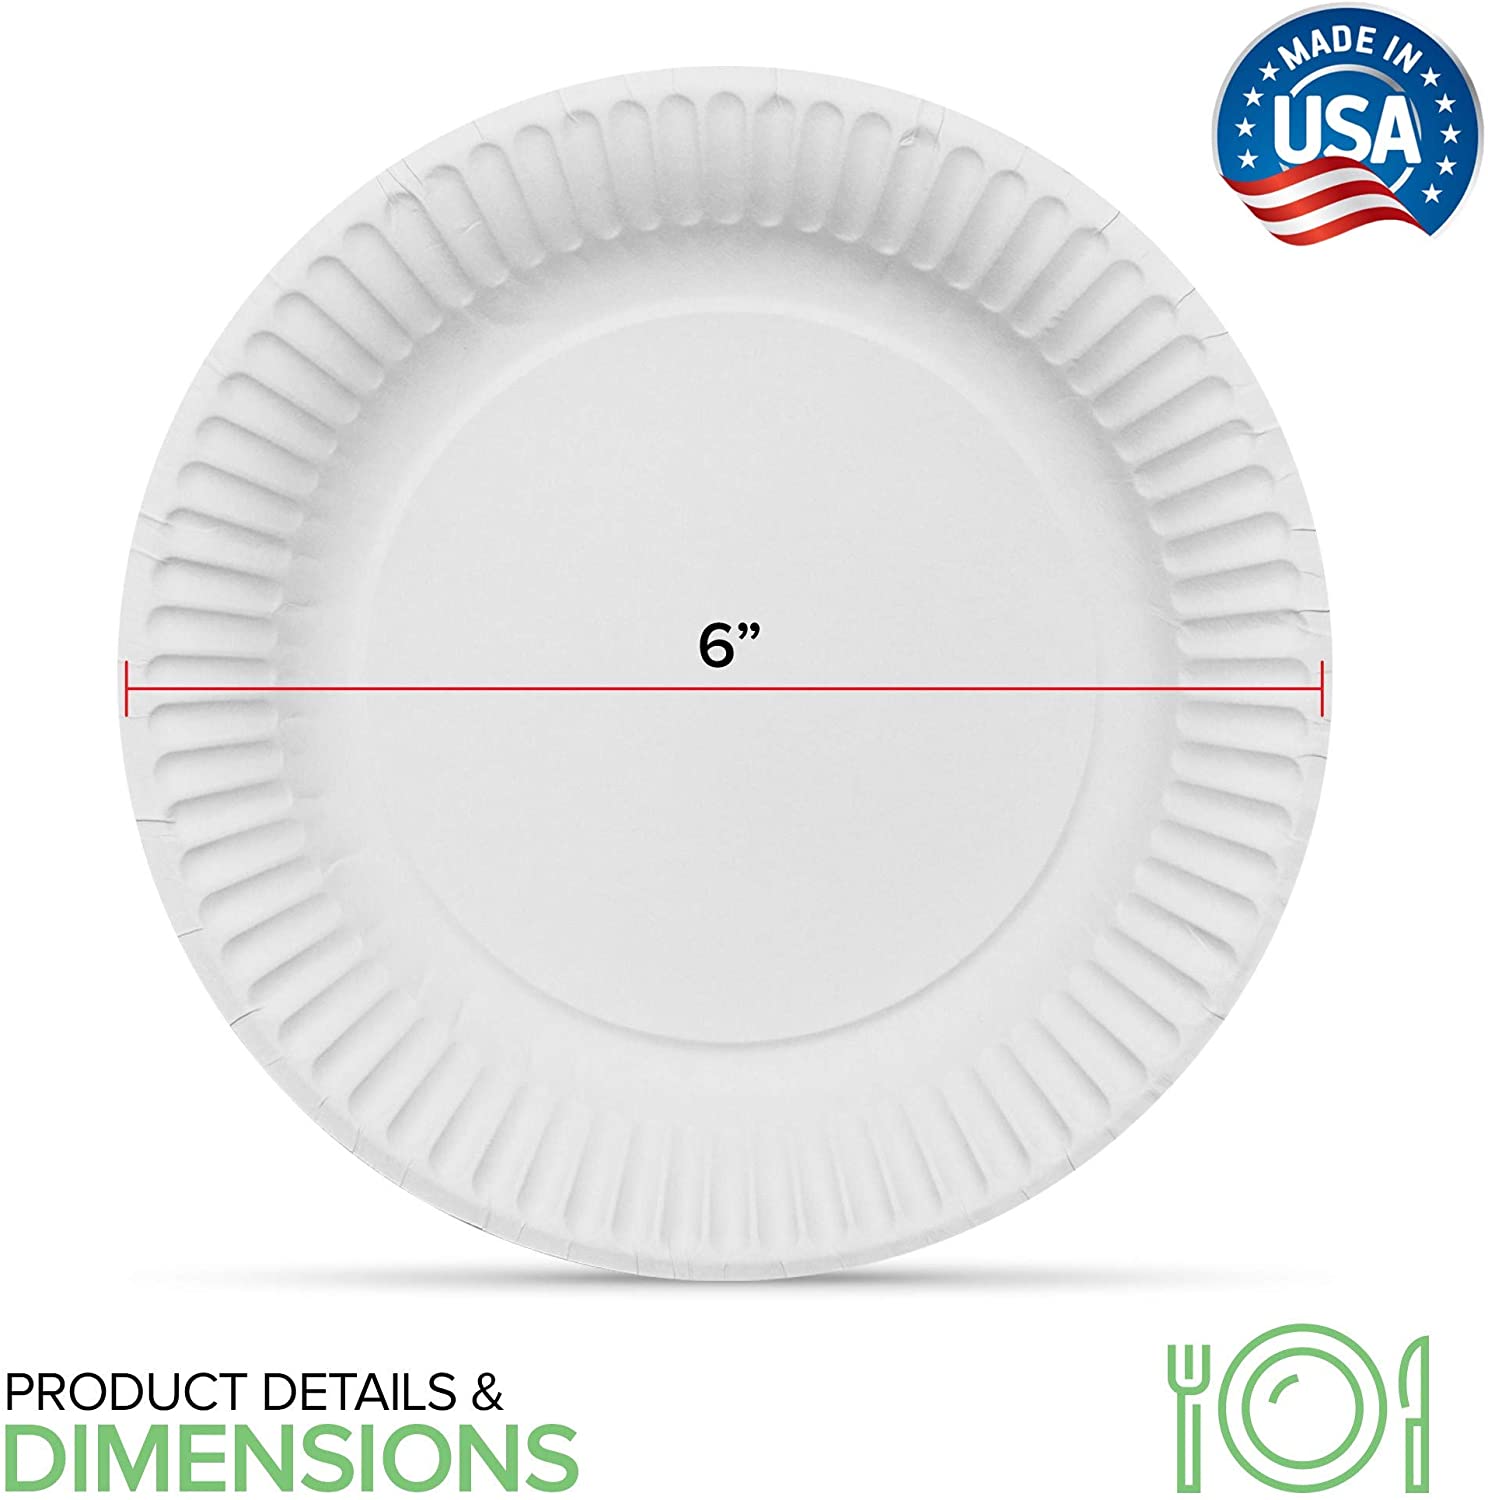 Bulk 9 In. Red Paper Plates - 1000 Ct